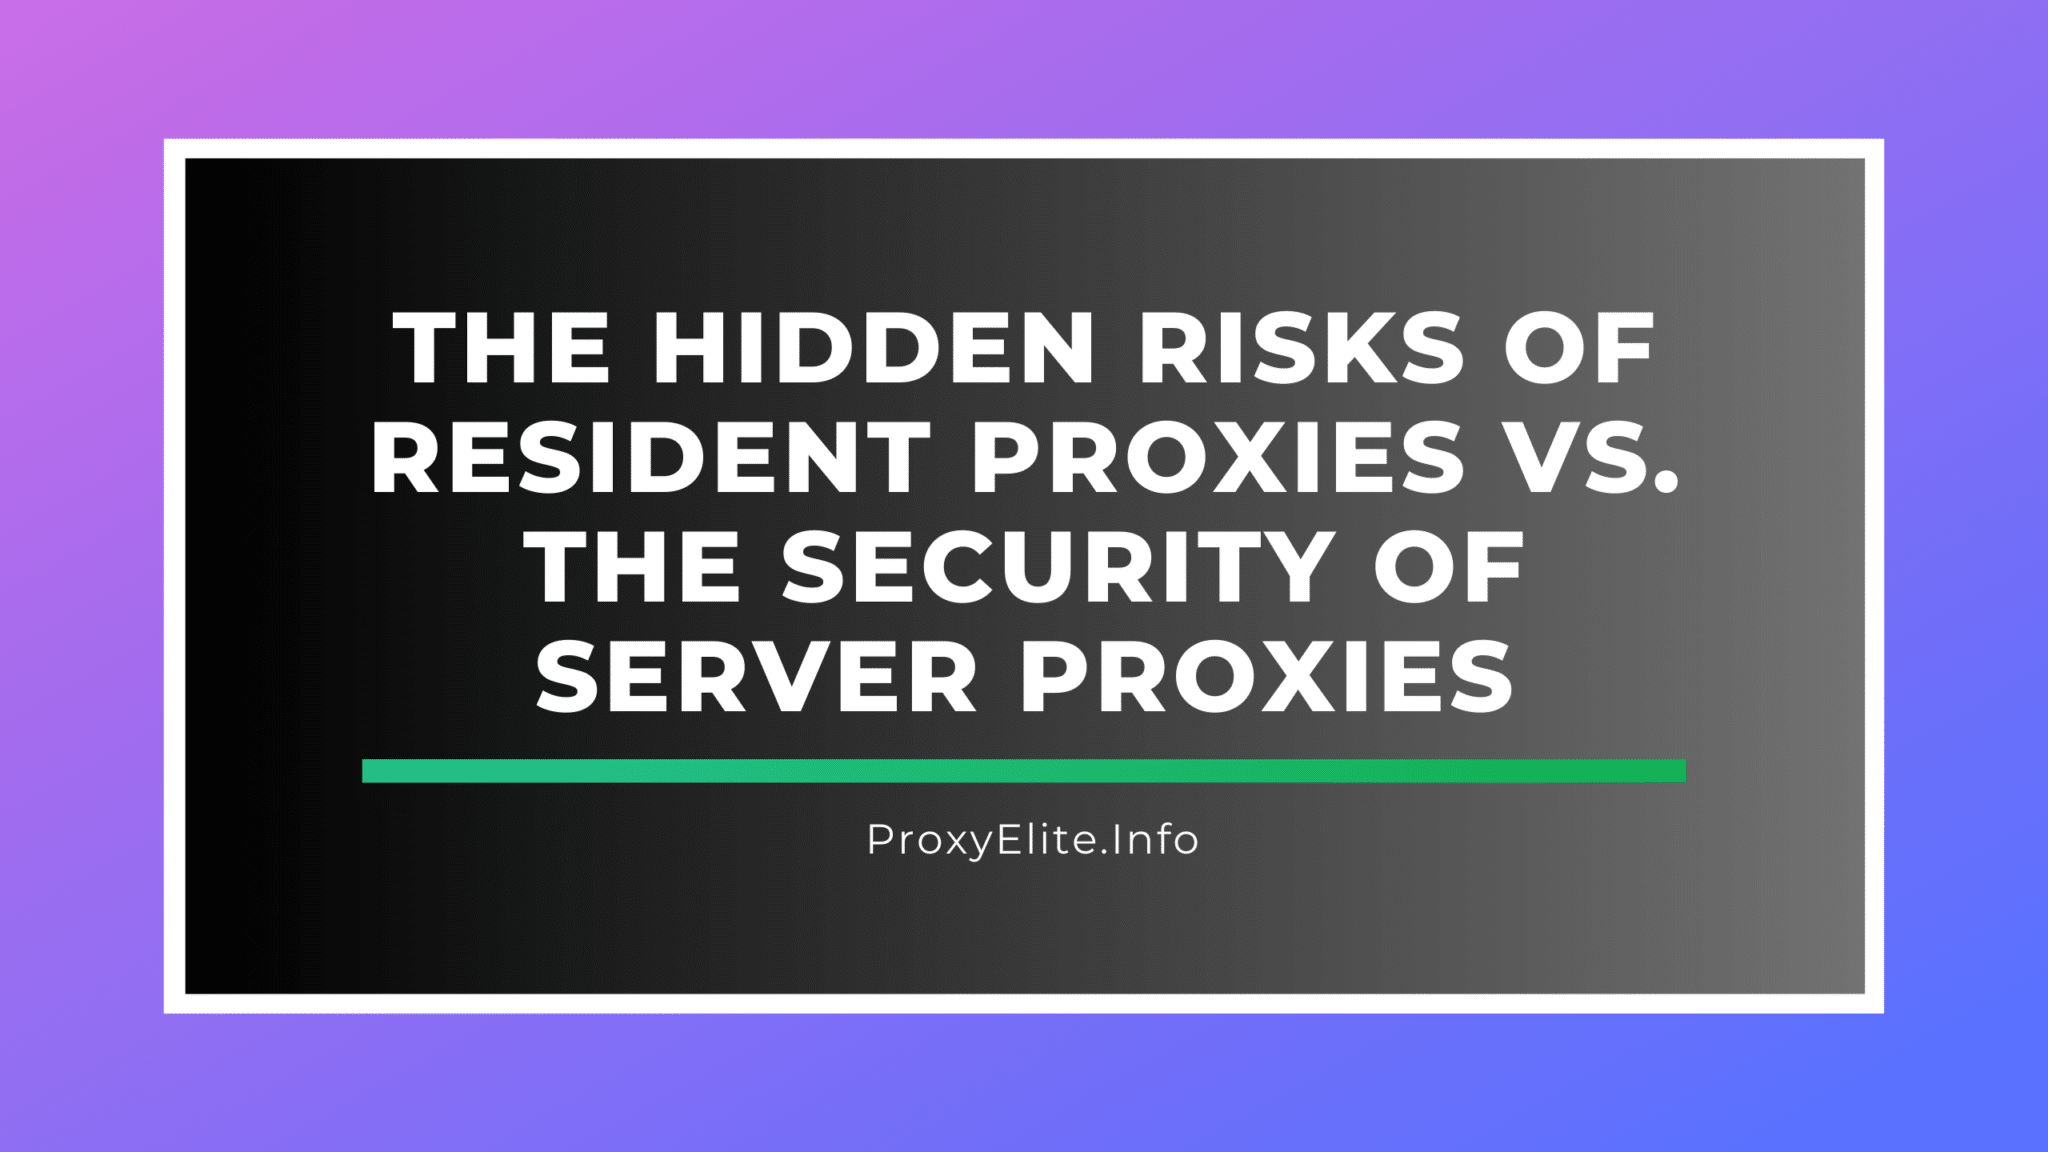 The Hidden Risks of Resident Proxies vs. the Security of Server Proxies